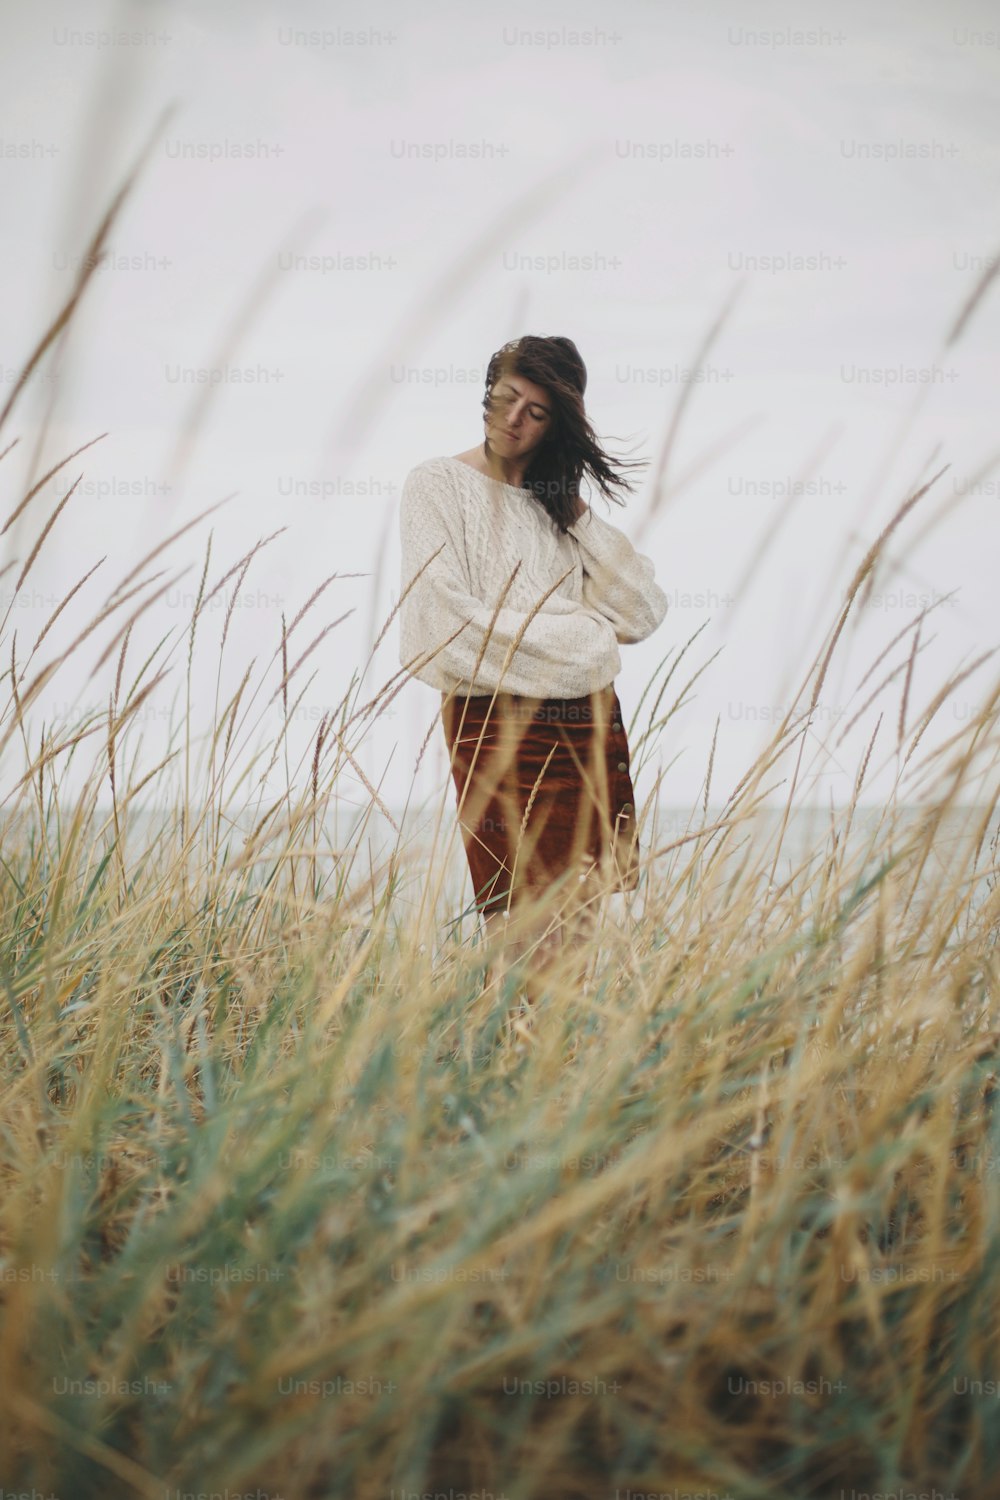 Beautiful stylish woman in knitted sweater and with windy hair posing among wild grass at sea. Authentic carefree moment. Fashionable young female standing on windy coast. Tranquility. Vertical